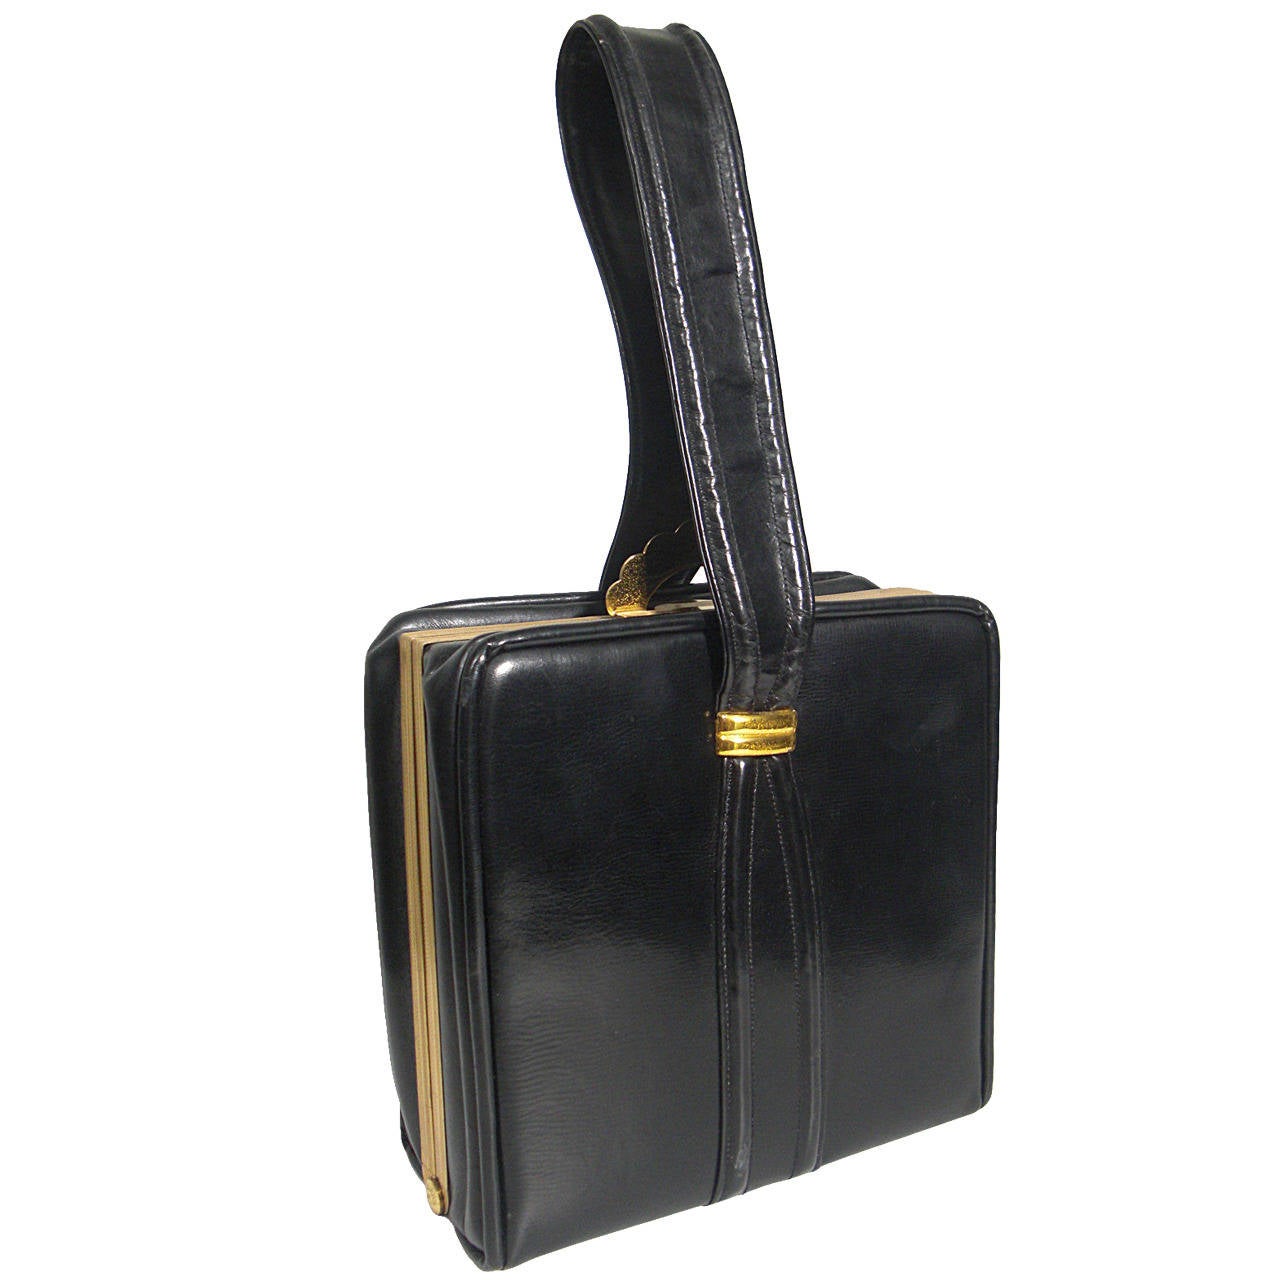 1950s Evans Black Leather Evening Bag with Brass Accessories